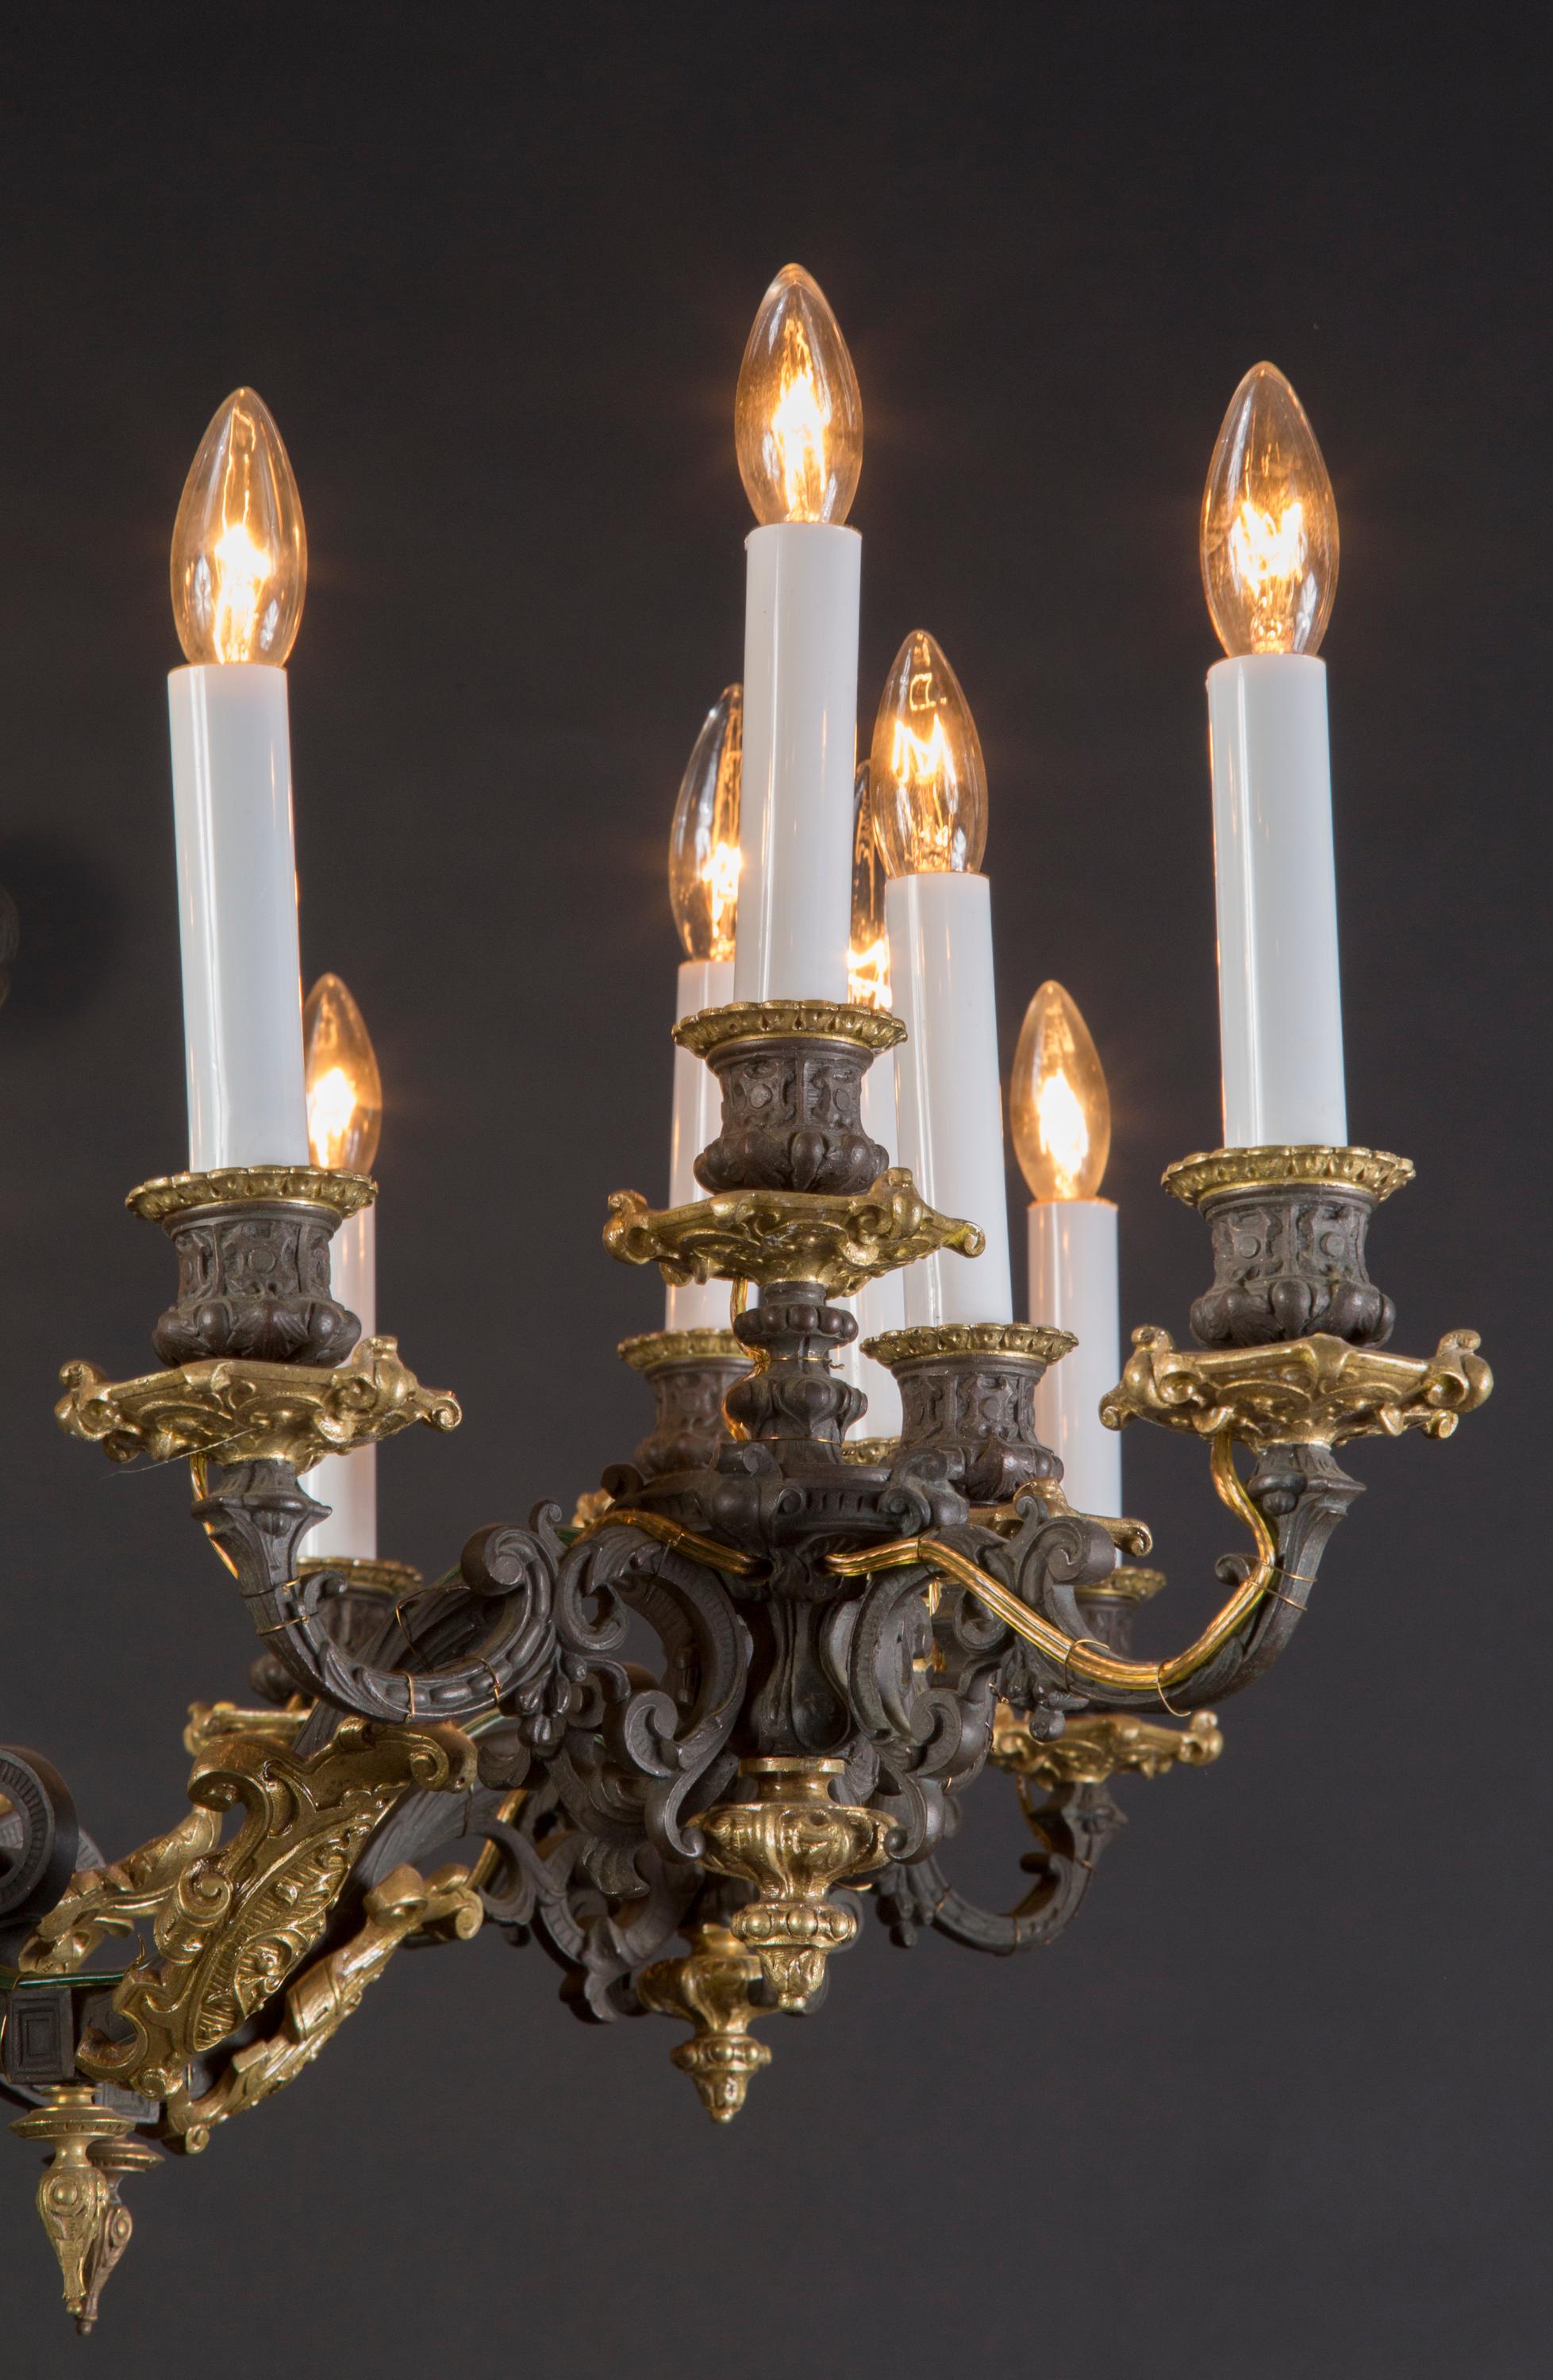 This phenomenal Restauration chandelier features a combination of patinated bronze and bronze d’ore which yields this undeniably eye-catching look. The French antique piece dates back to the 19th century and offers details in plenty; Note the